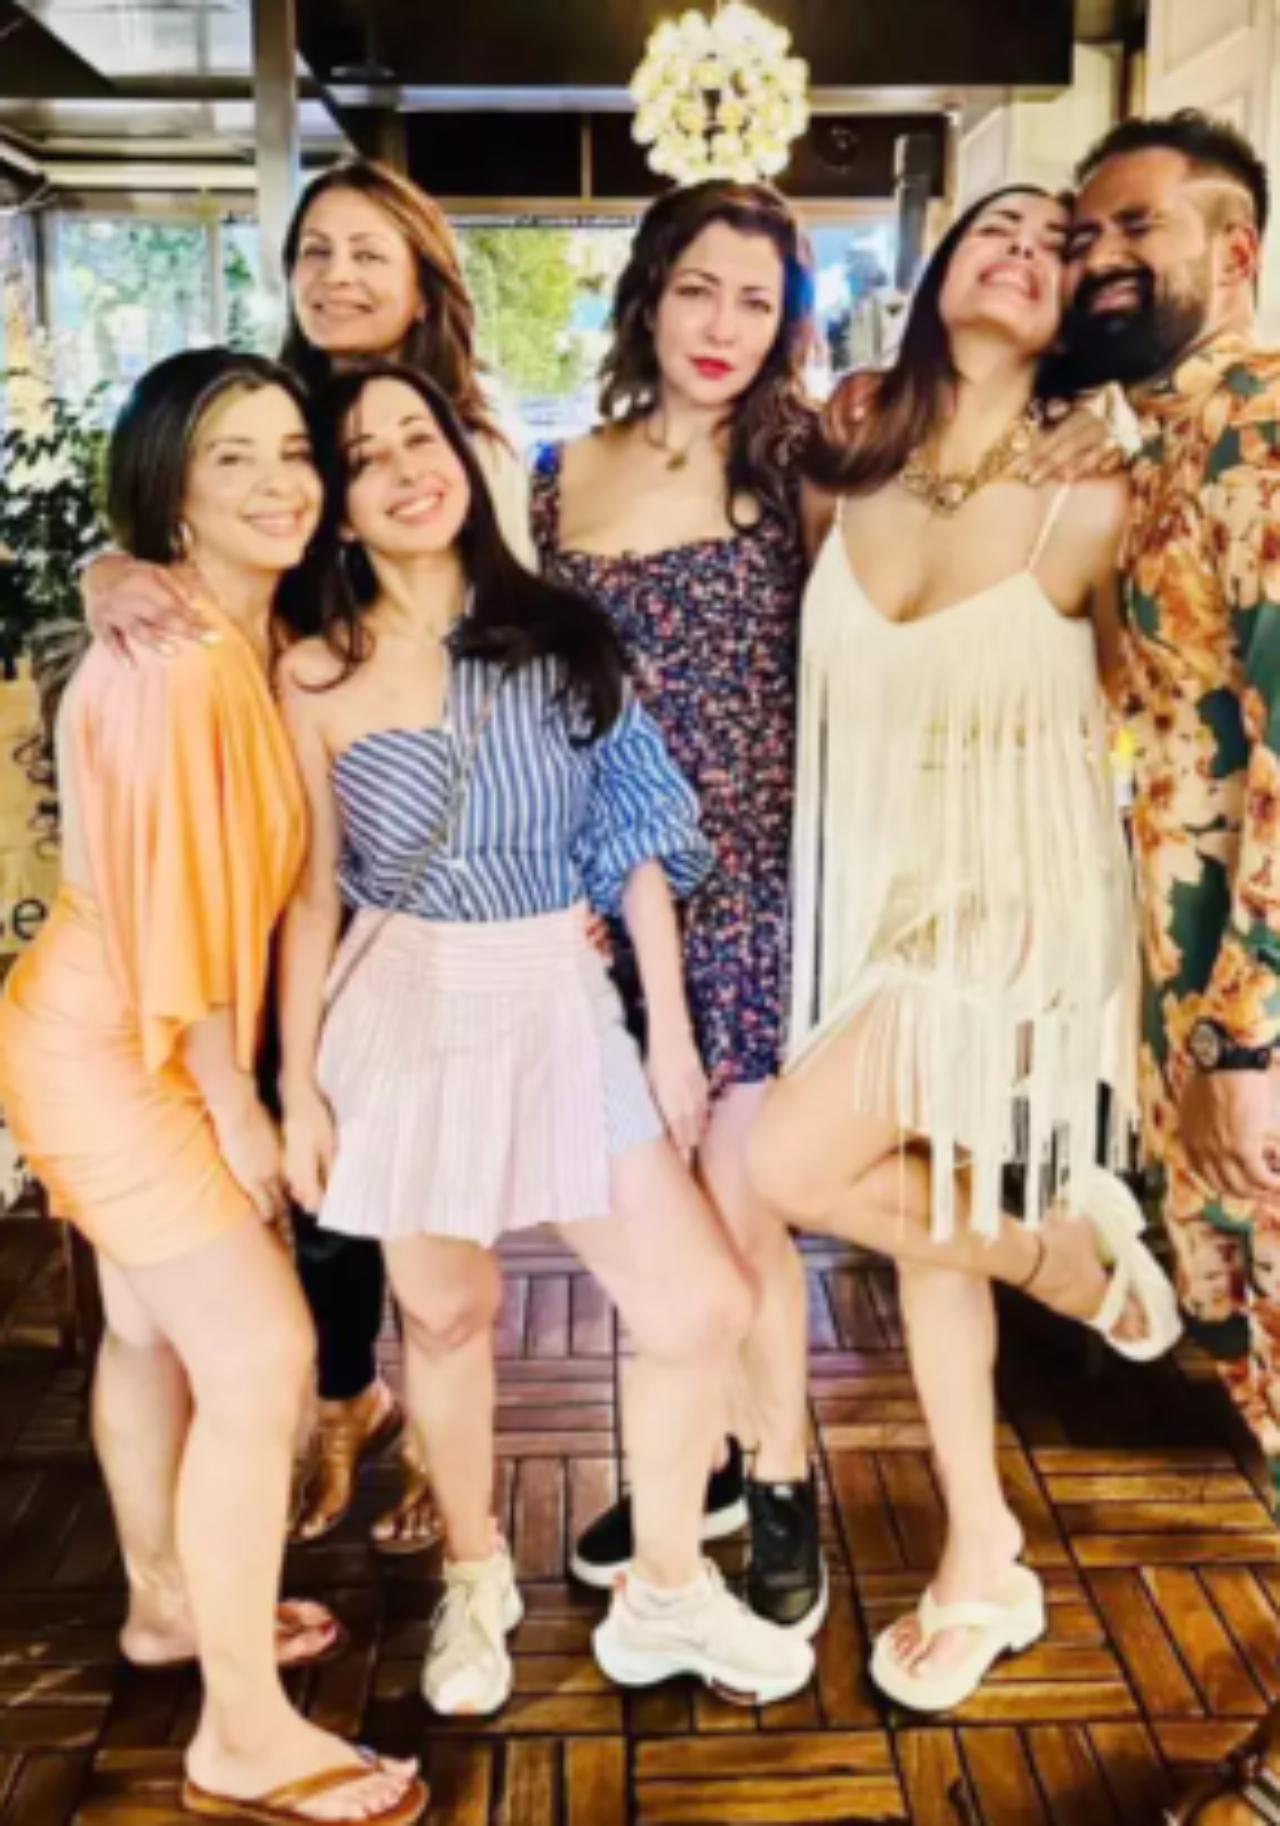 Delnaz Daruwala shared a picture of the entire gang having a gala time. Malaika looks stunning in her white fringe dress. The group is definitely setting friendship goals!